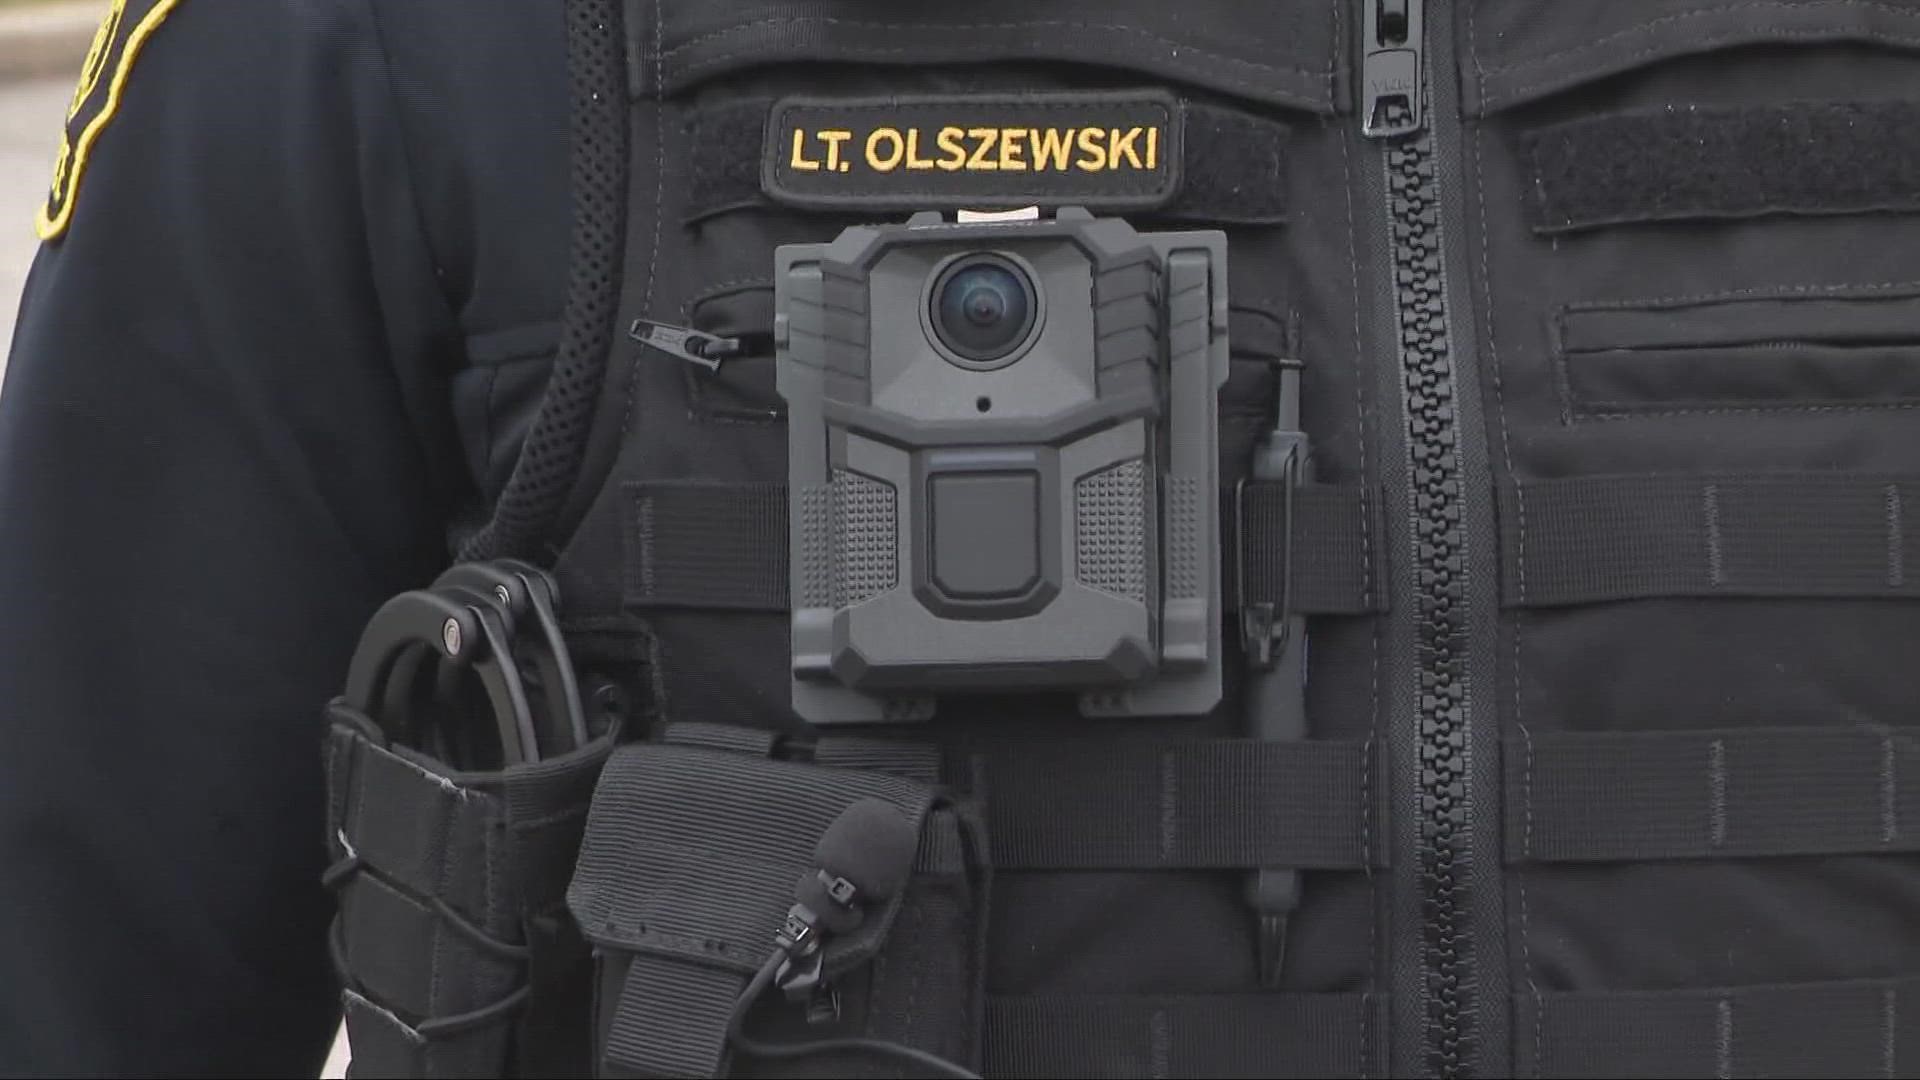 A total of 112 law enforcement agencies in Ohio will receive grant funding as part of the Ohio Body-Worn Camera Grant Program.